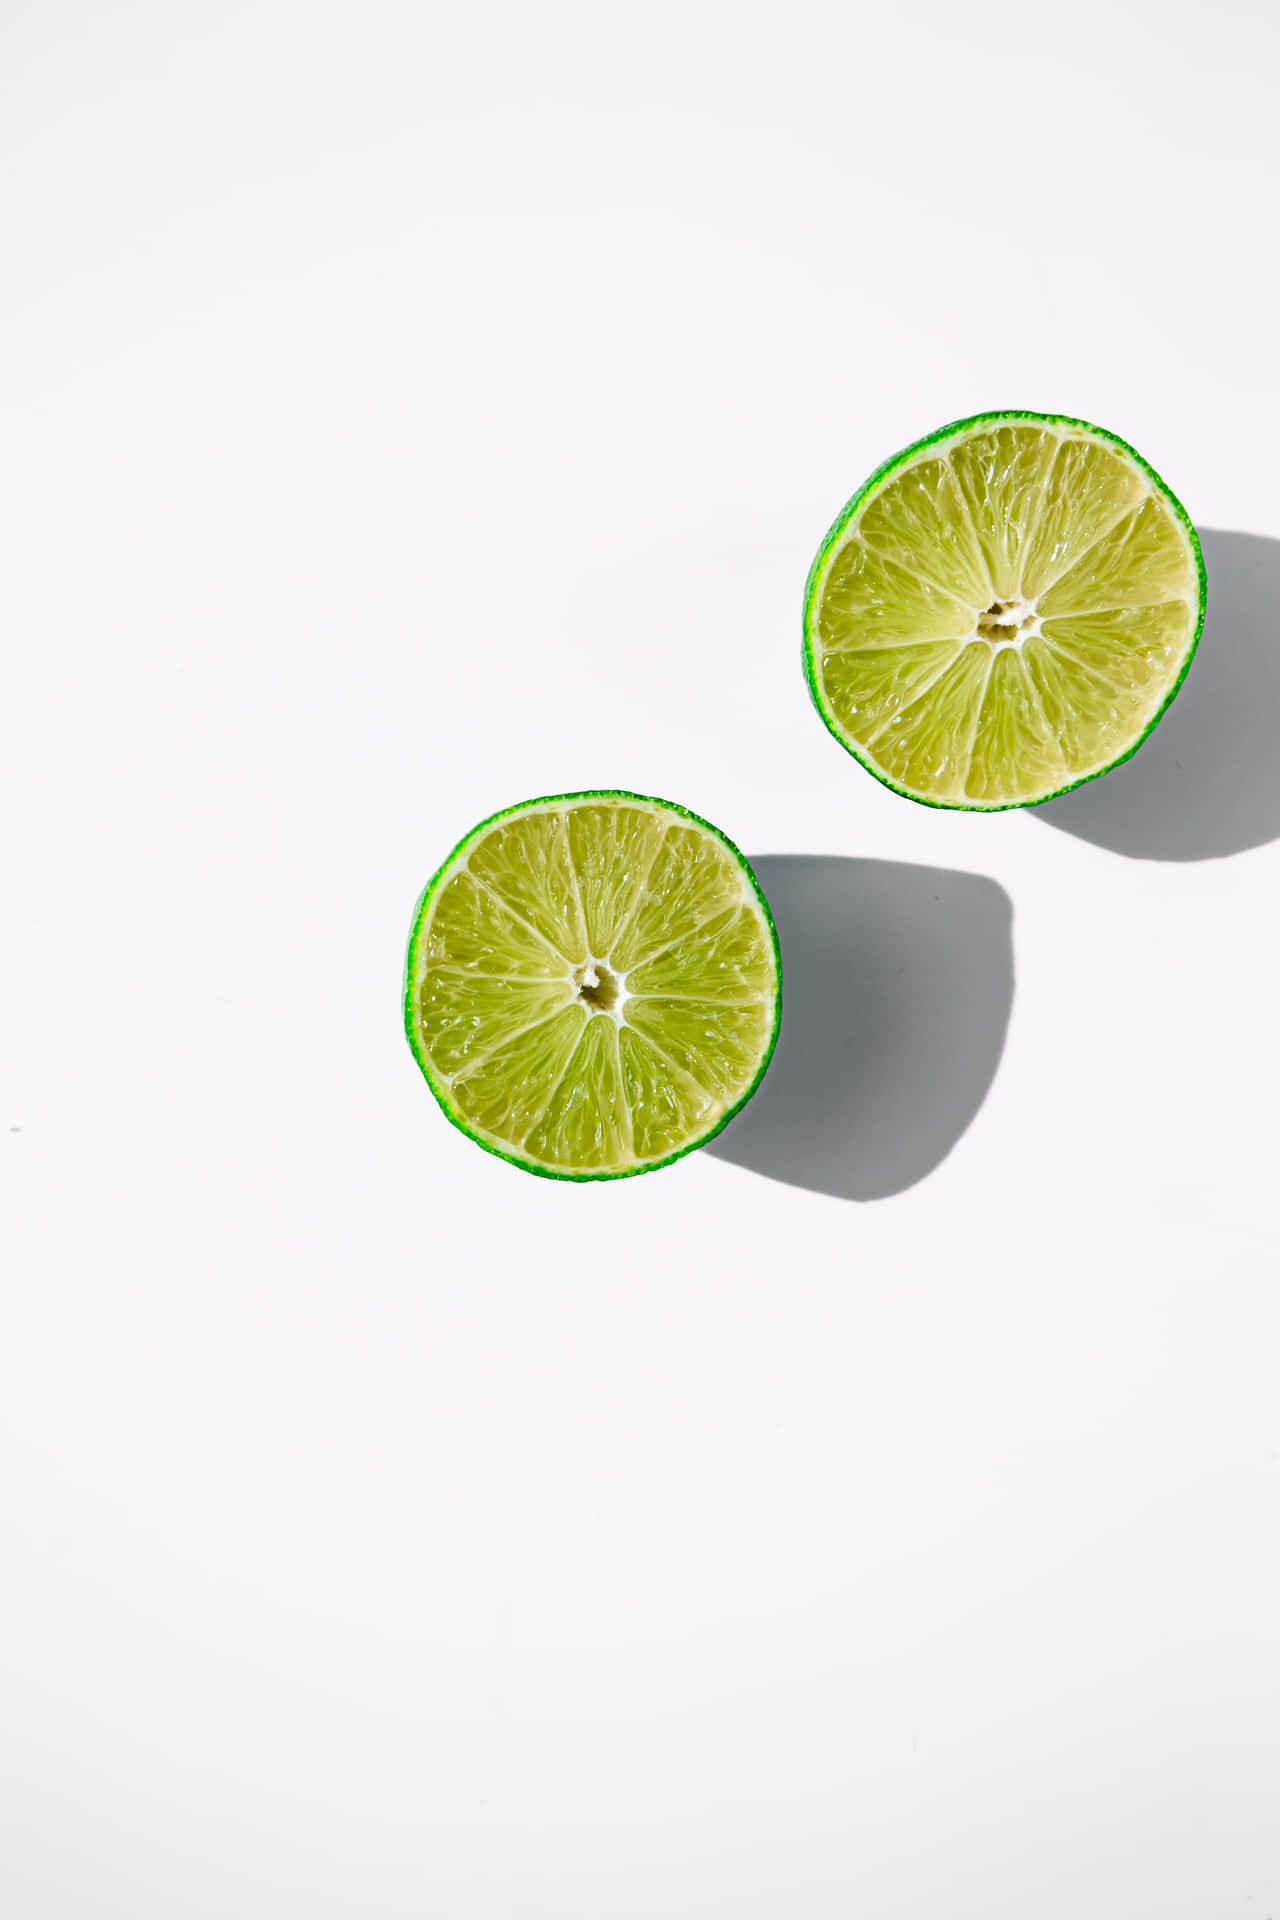 Lime Slices On White Background